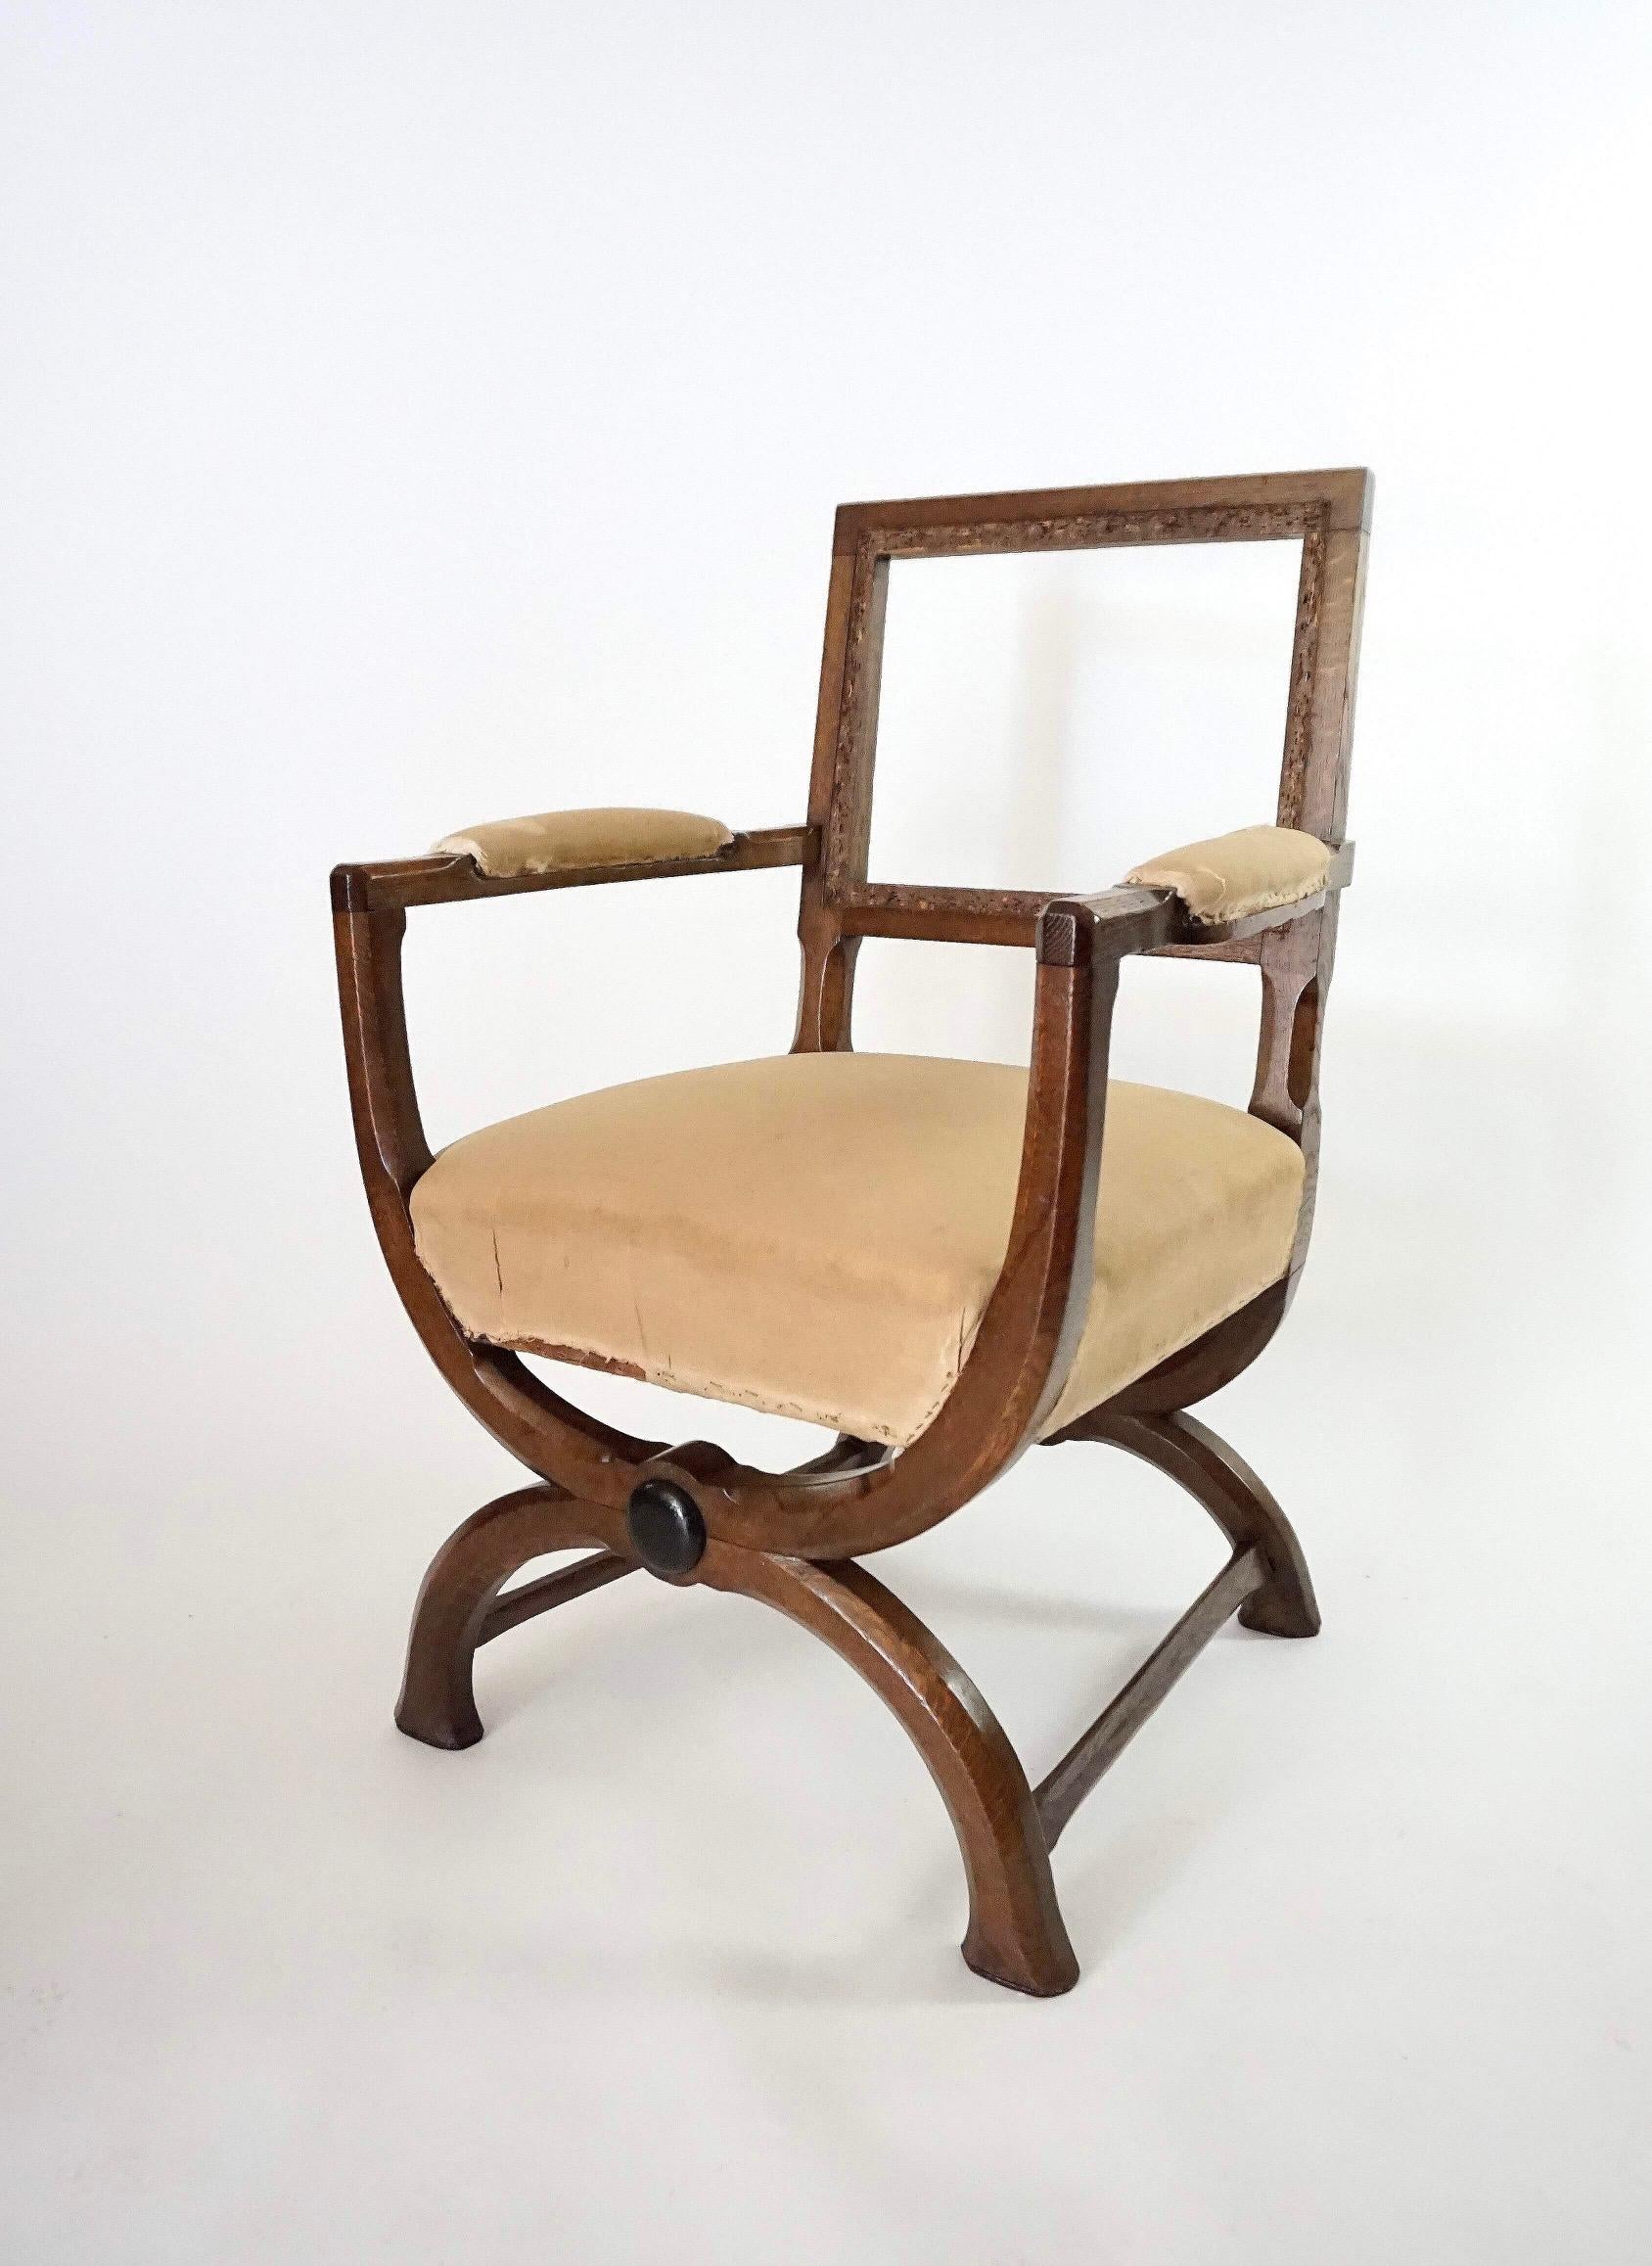 English Oak Gothic Style Curule Armchairs Attributed to A.W.N. Pugin, circa 1830 For Sale 4